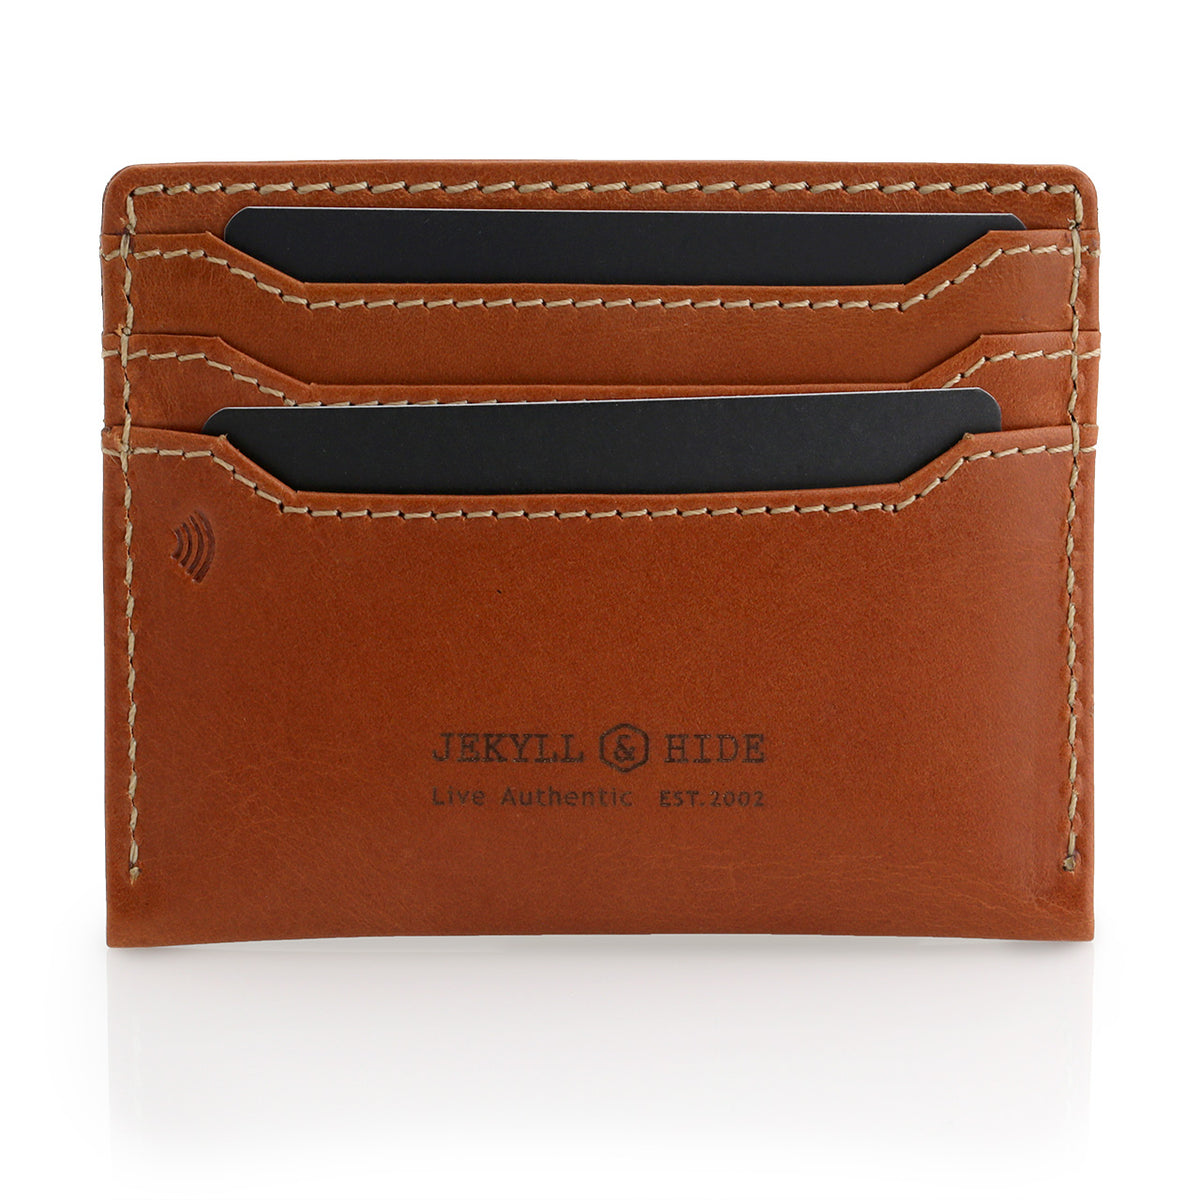 Jekyll and Hyde Slim cardholder, Roma Tan with RFD protection